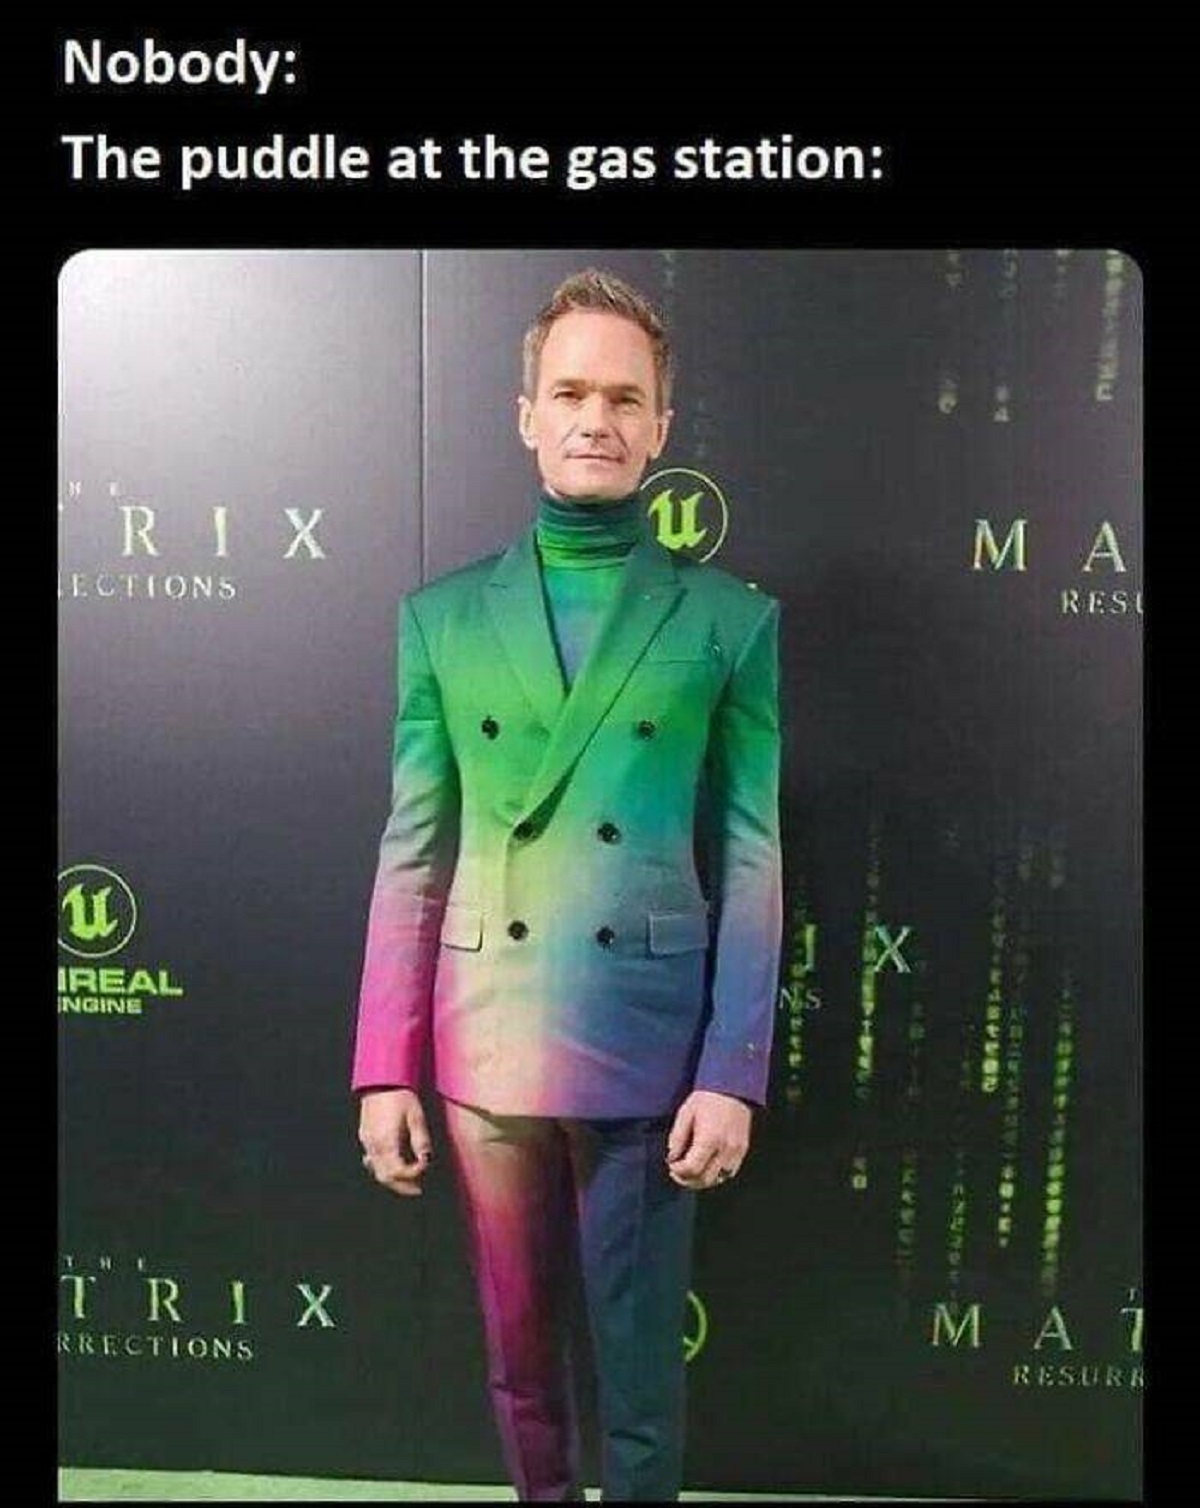 neil patrick harris oil suit - Nobody The puddle at the gas station Rix Ections Ireal Ingine Th Trix Rrections u Jx Resu 1 Resurr